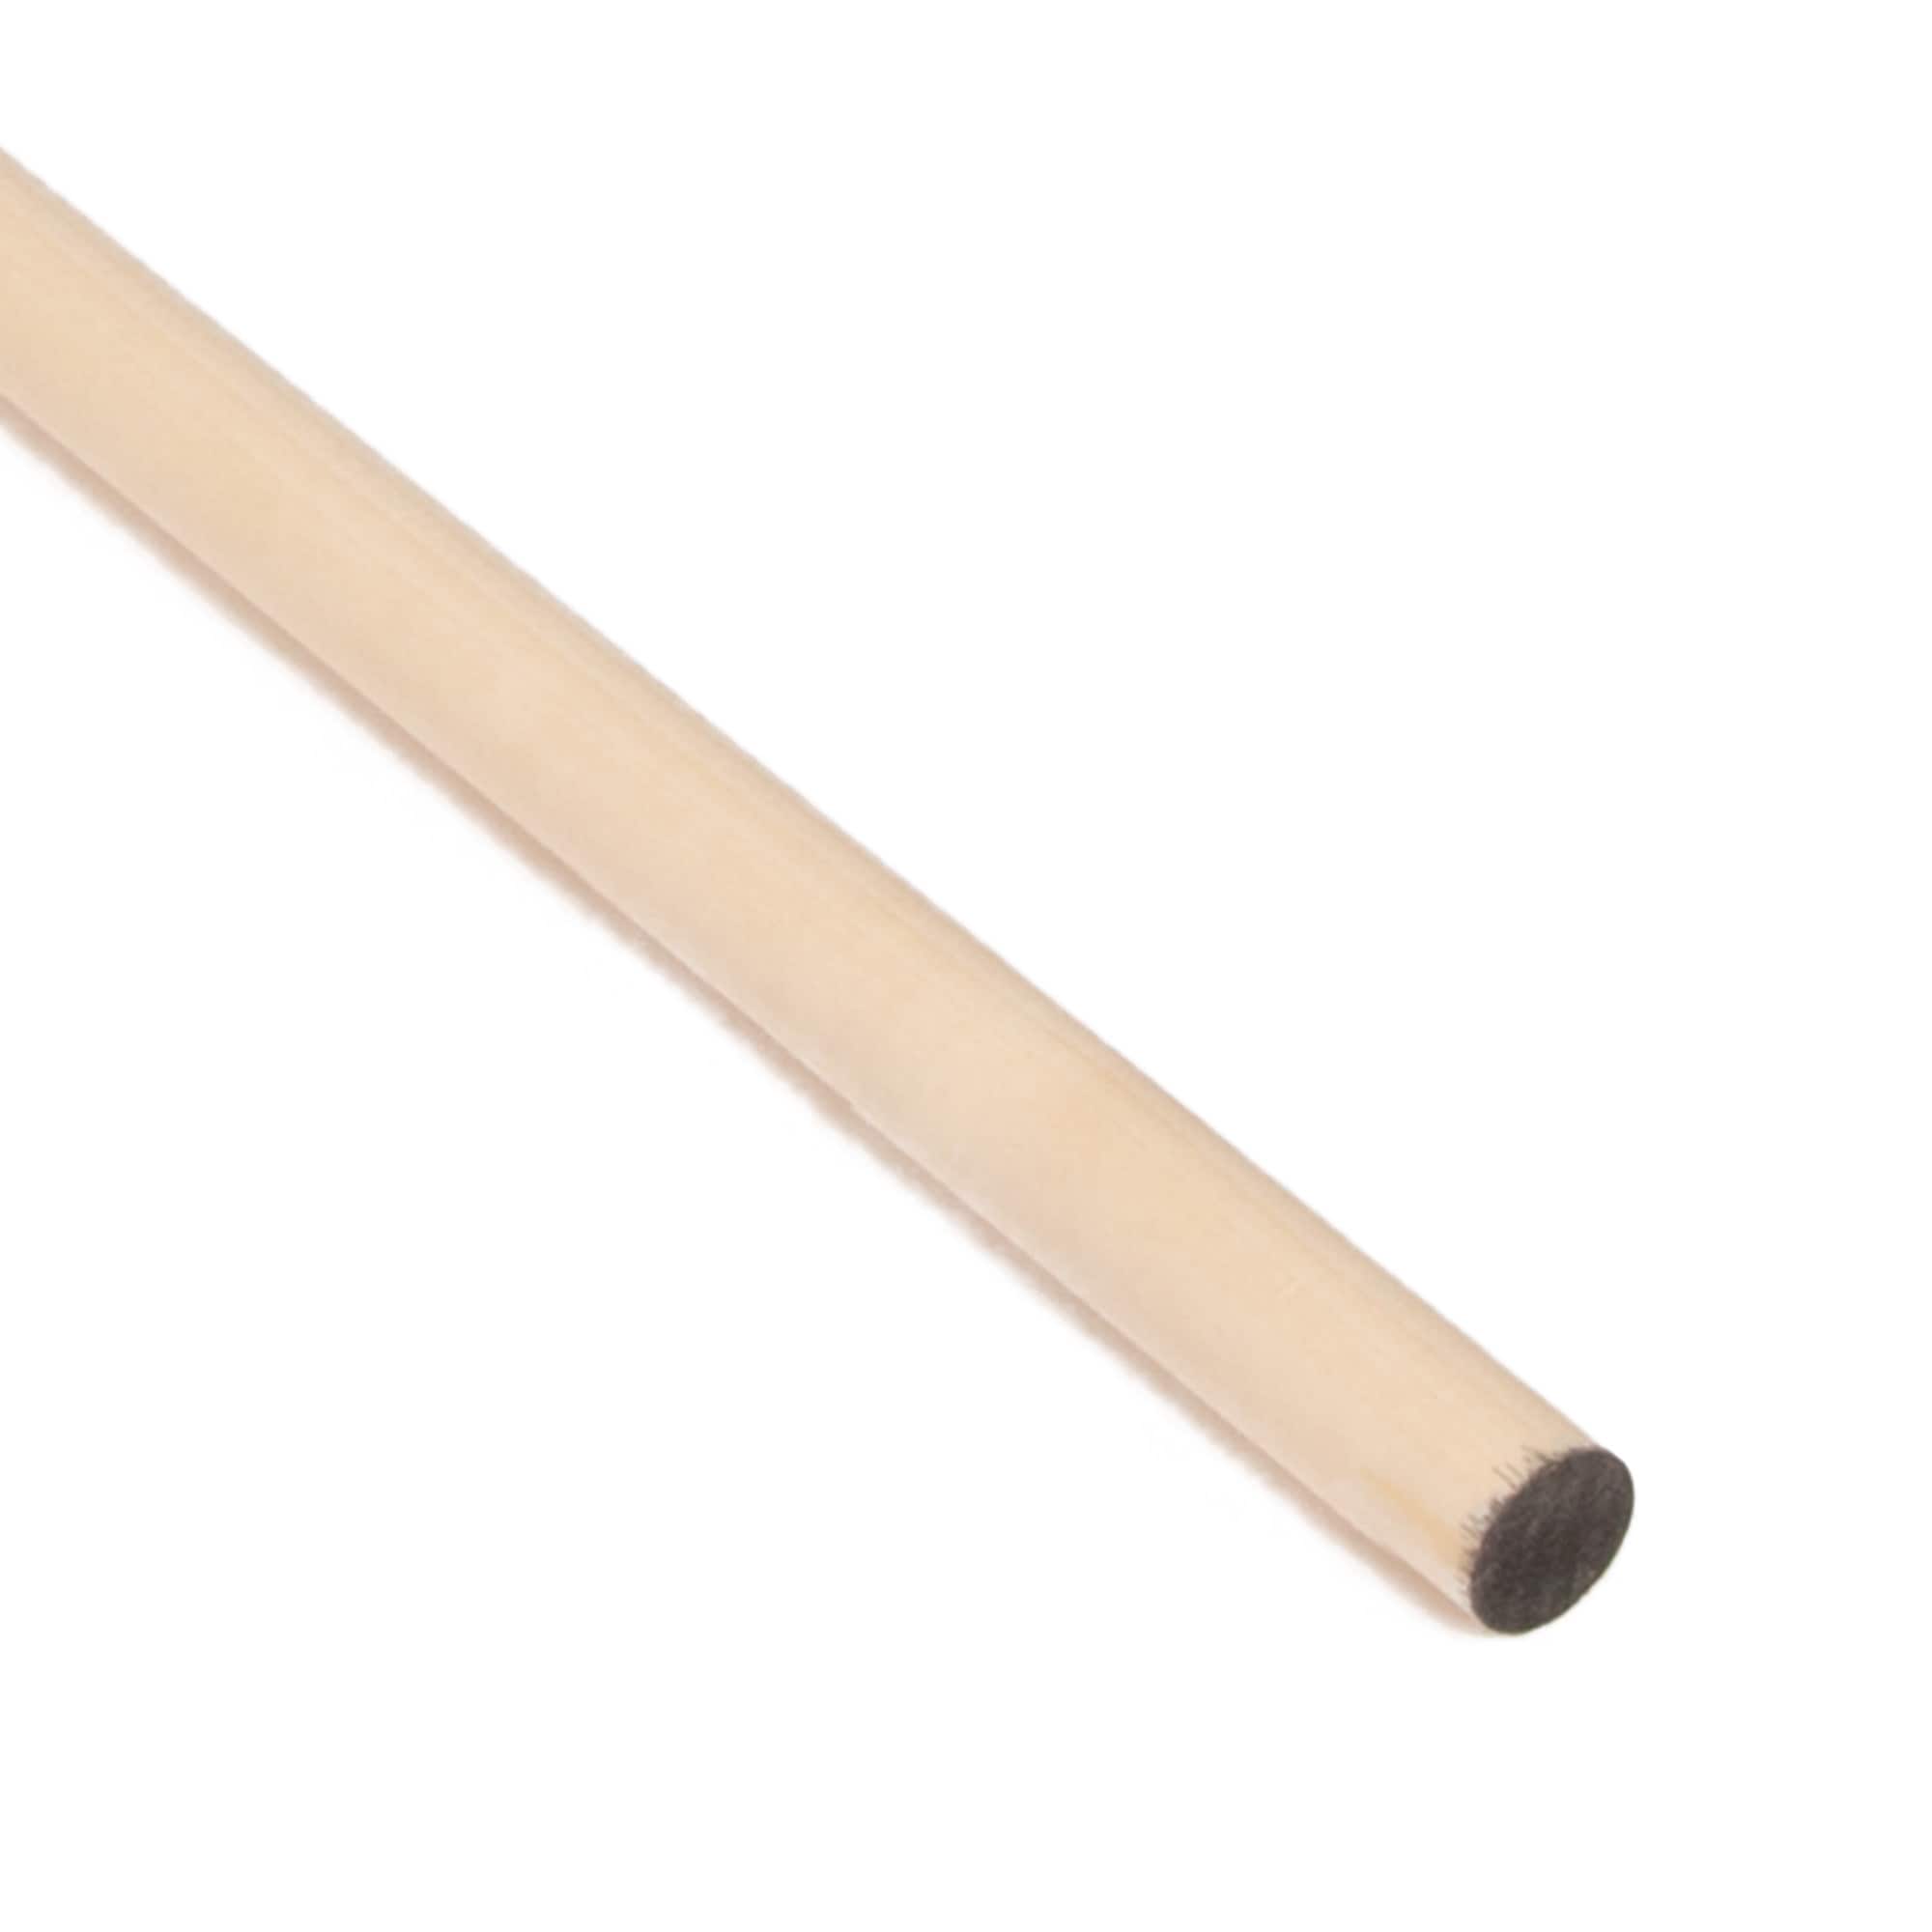 Wooden Dowel Rods 3 inch Thick, Multiple Lengths Available